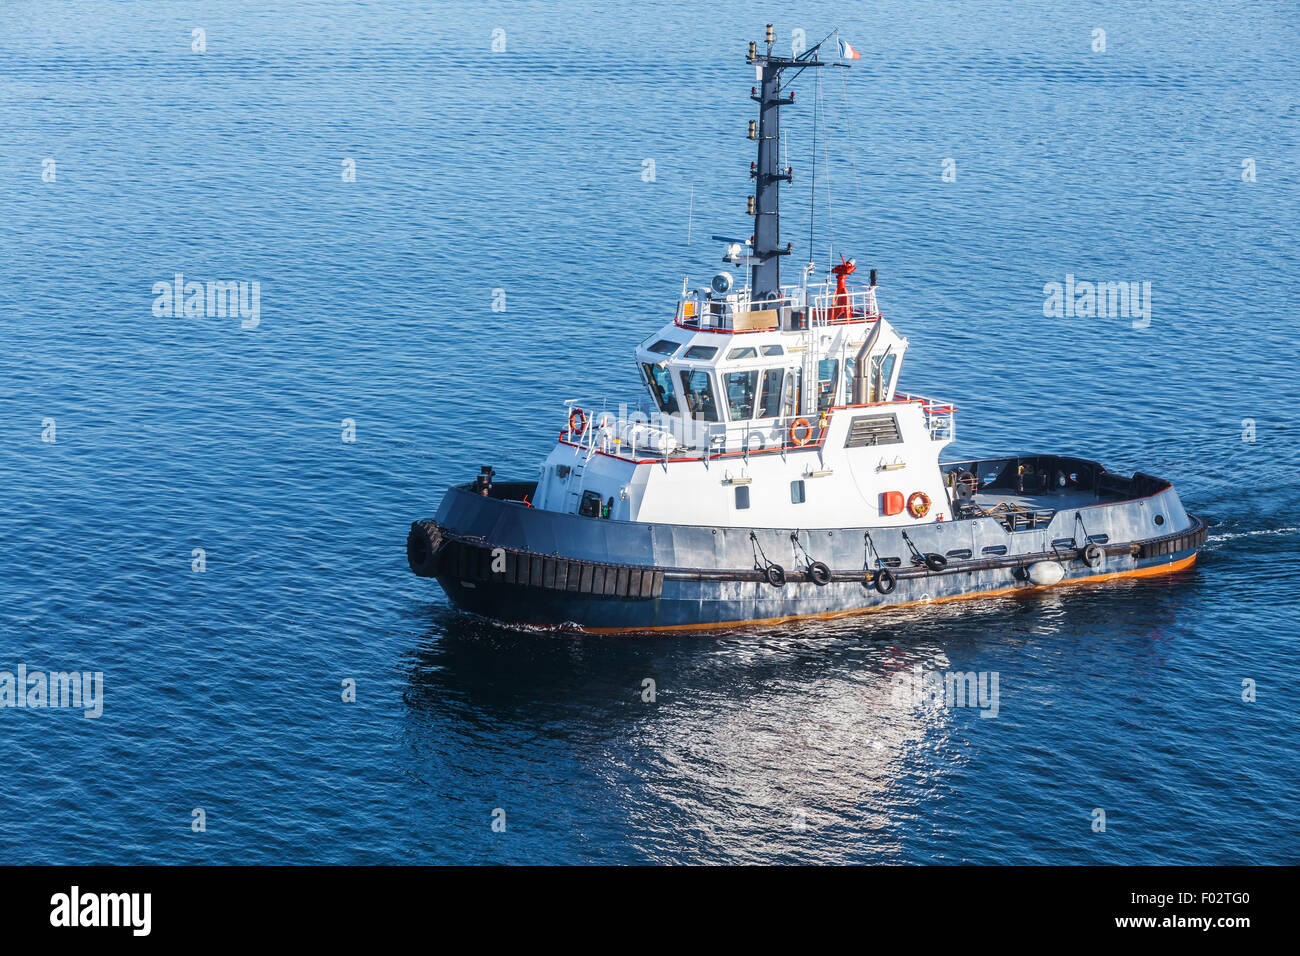 Small tug boat with white superstructure and dark blue hull underway on sea water Stock Photo